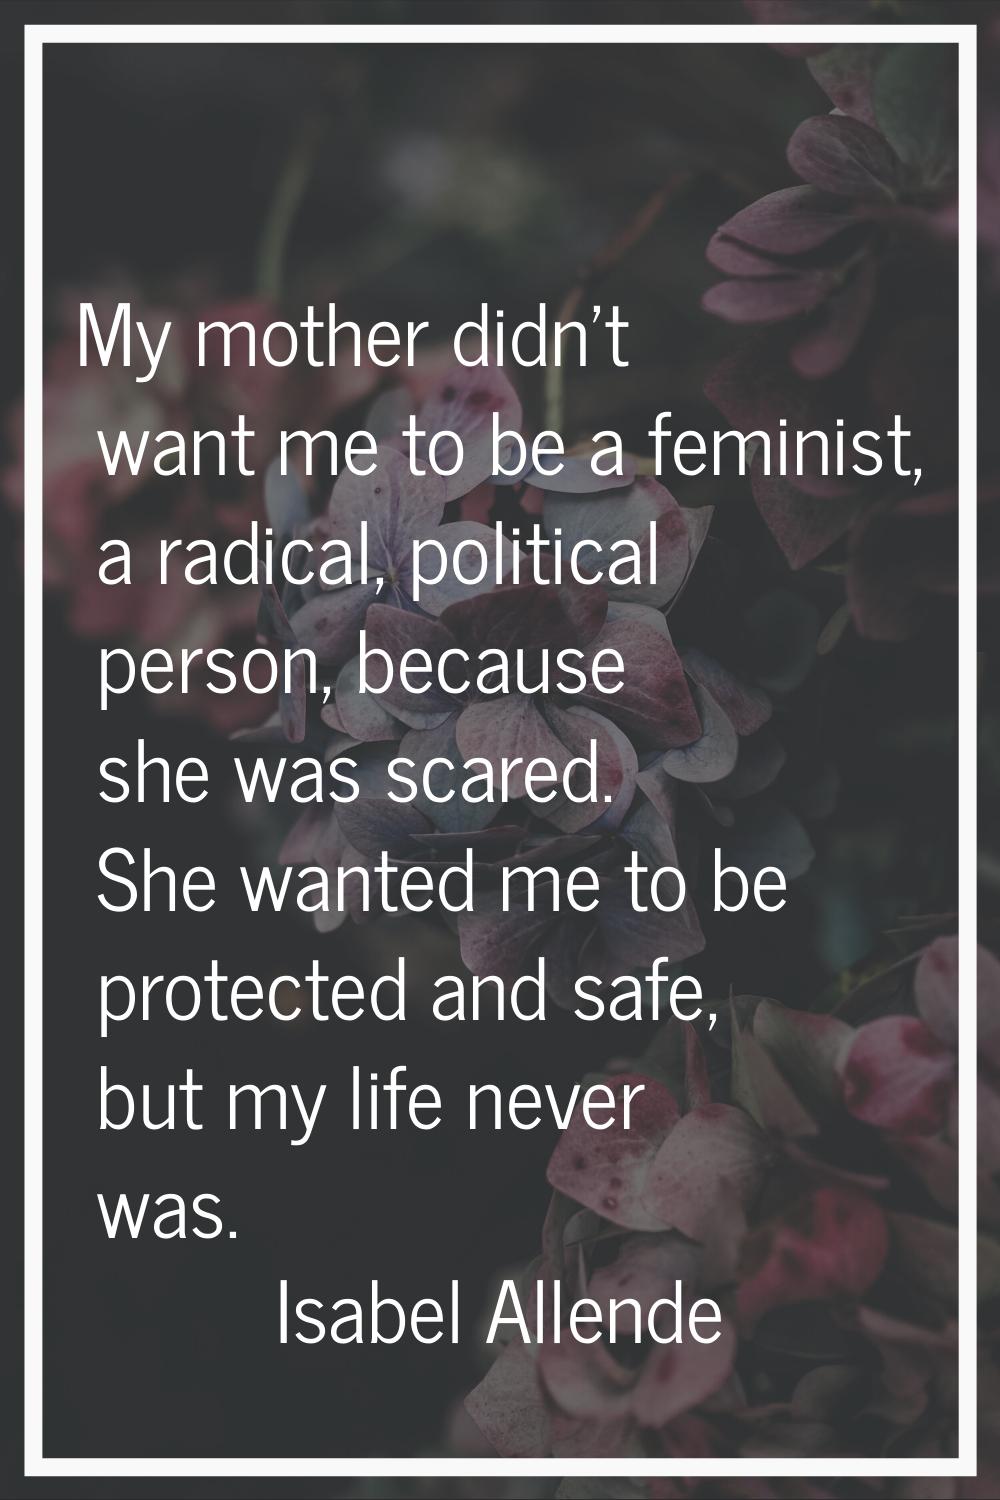 My mother didn't want me to be a feminist, a radical, political person, because she was scared. She